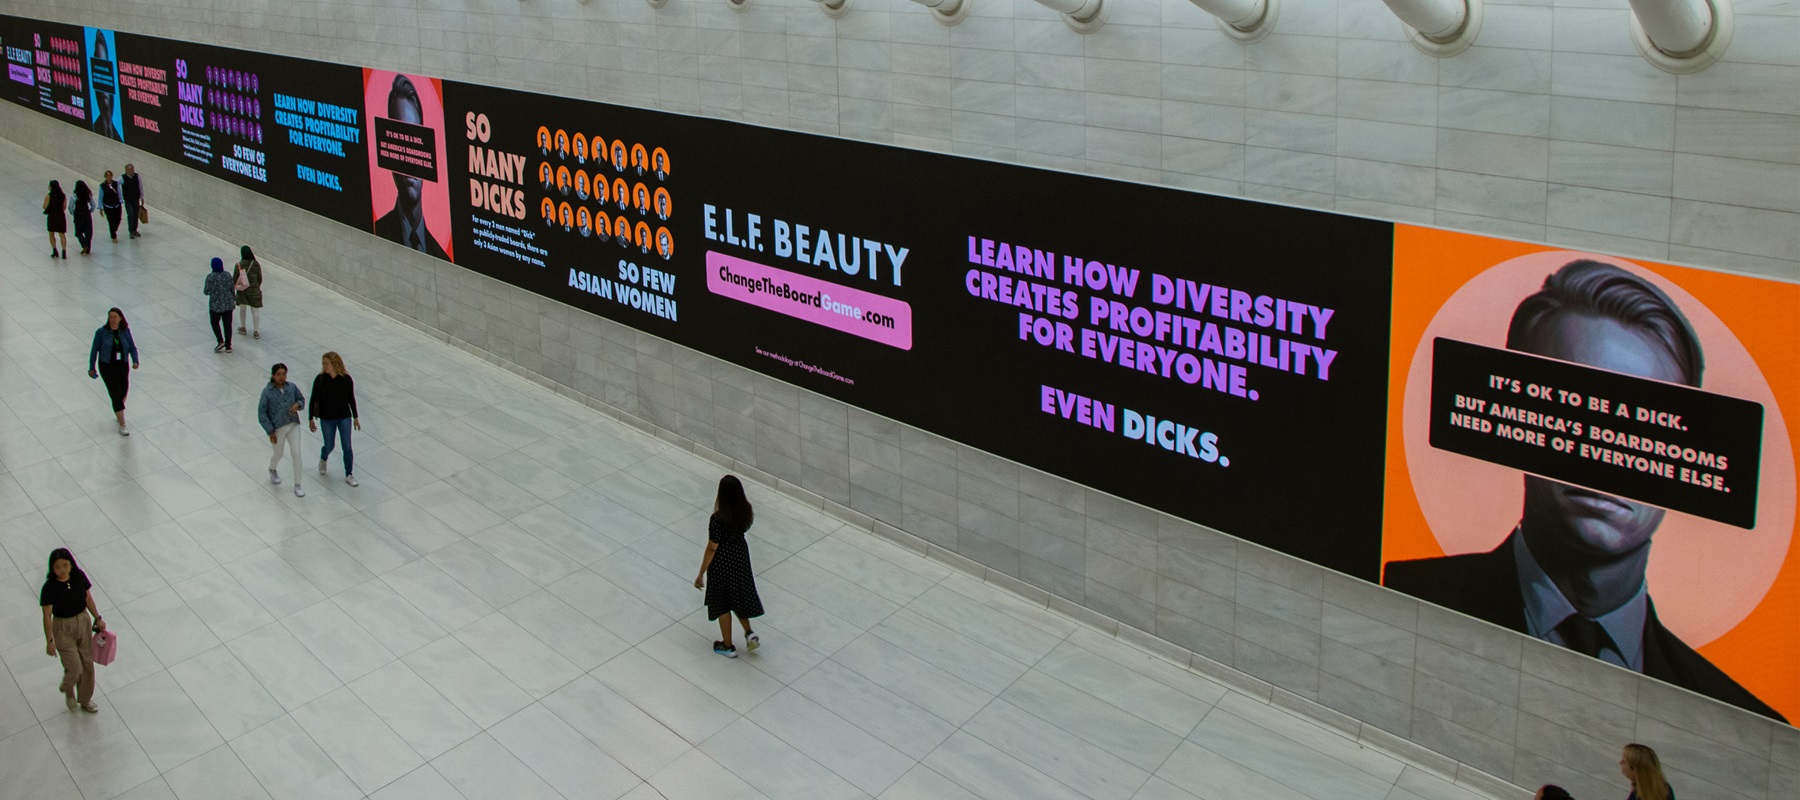 American cosmetic brand e.l.f. Beauty calls out inequity in US boardrooms with DOOH campaign